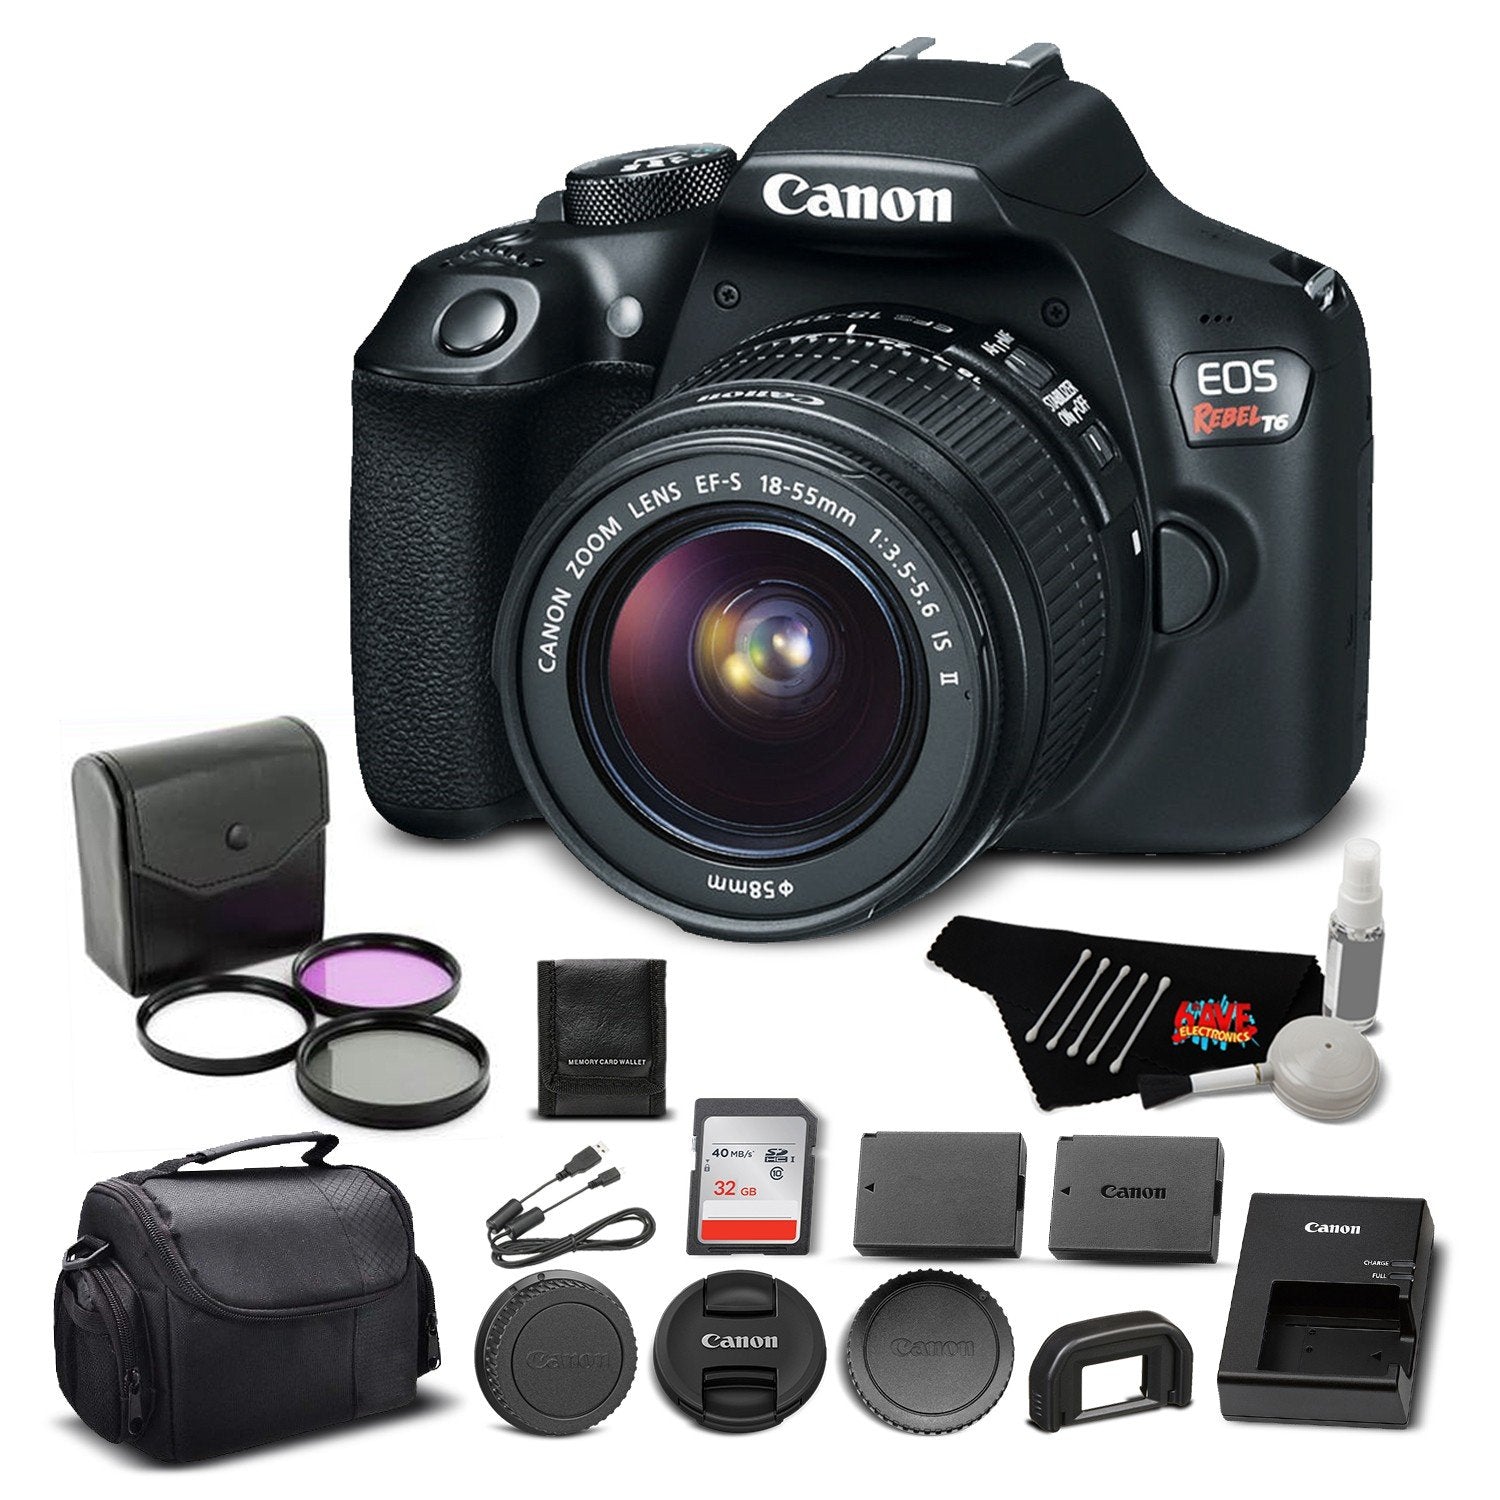 Canon EOS Rebel T6 Digital SLR Camera Bundle with EF-S 18-55mm f/3.5-5.6 IS II Lens with 32GB Memory Card + More